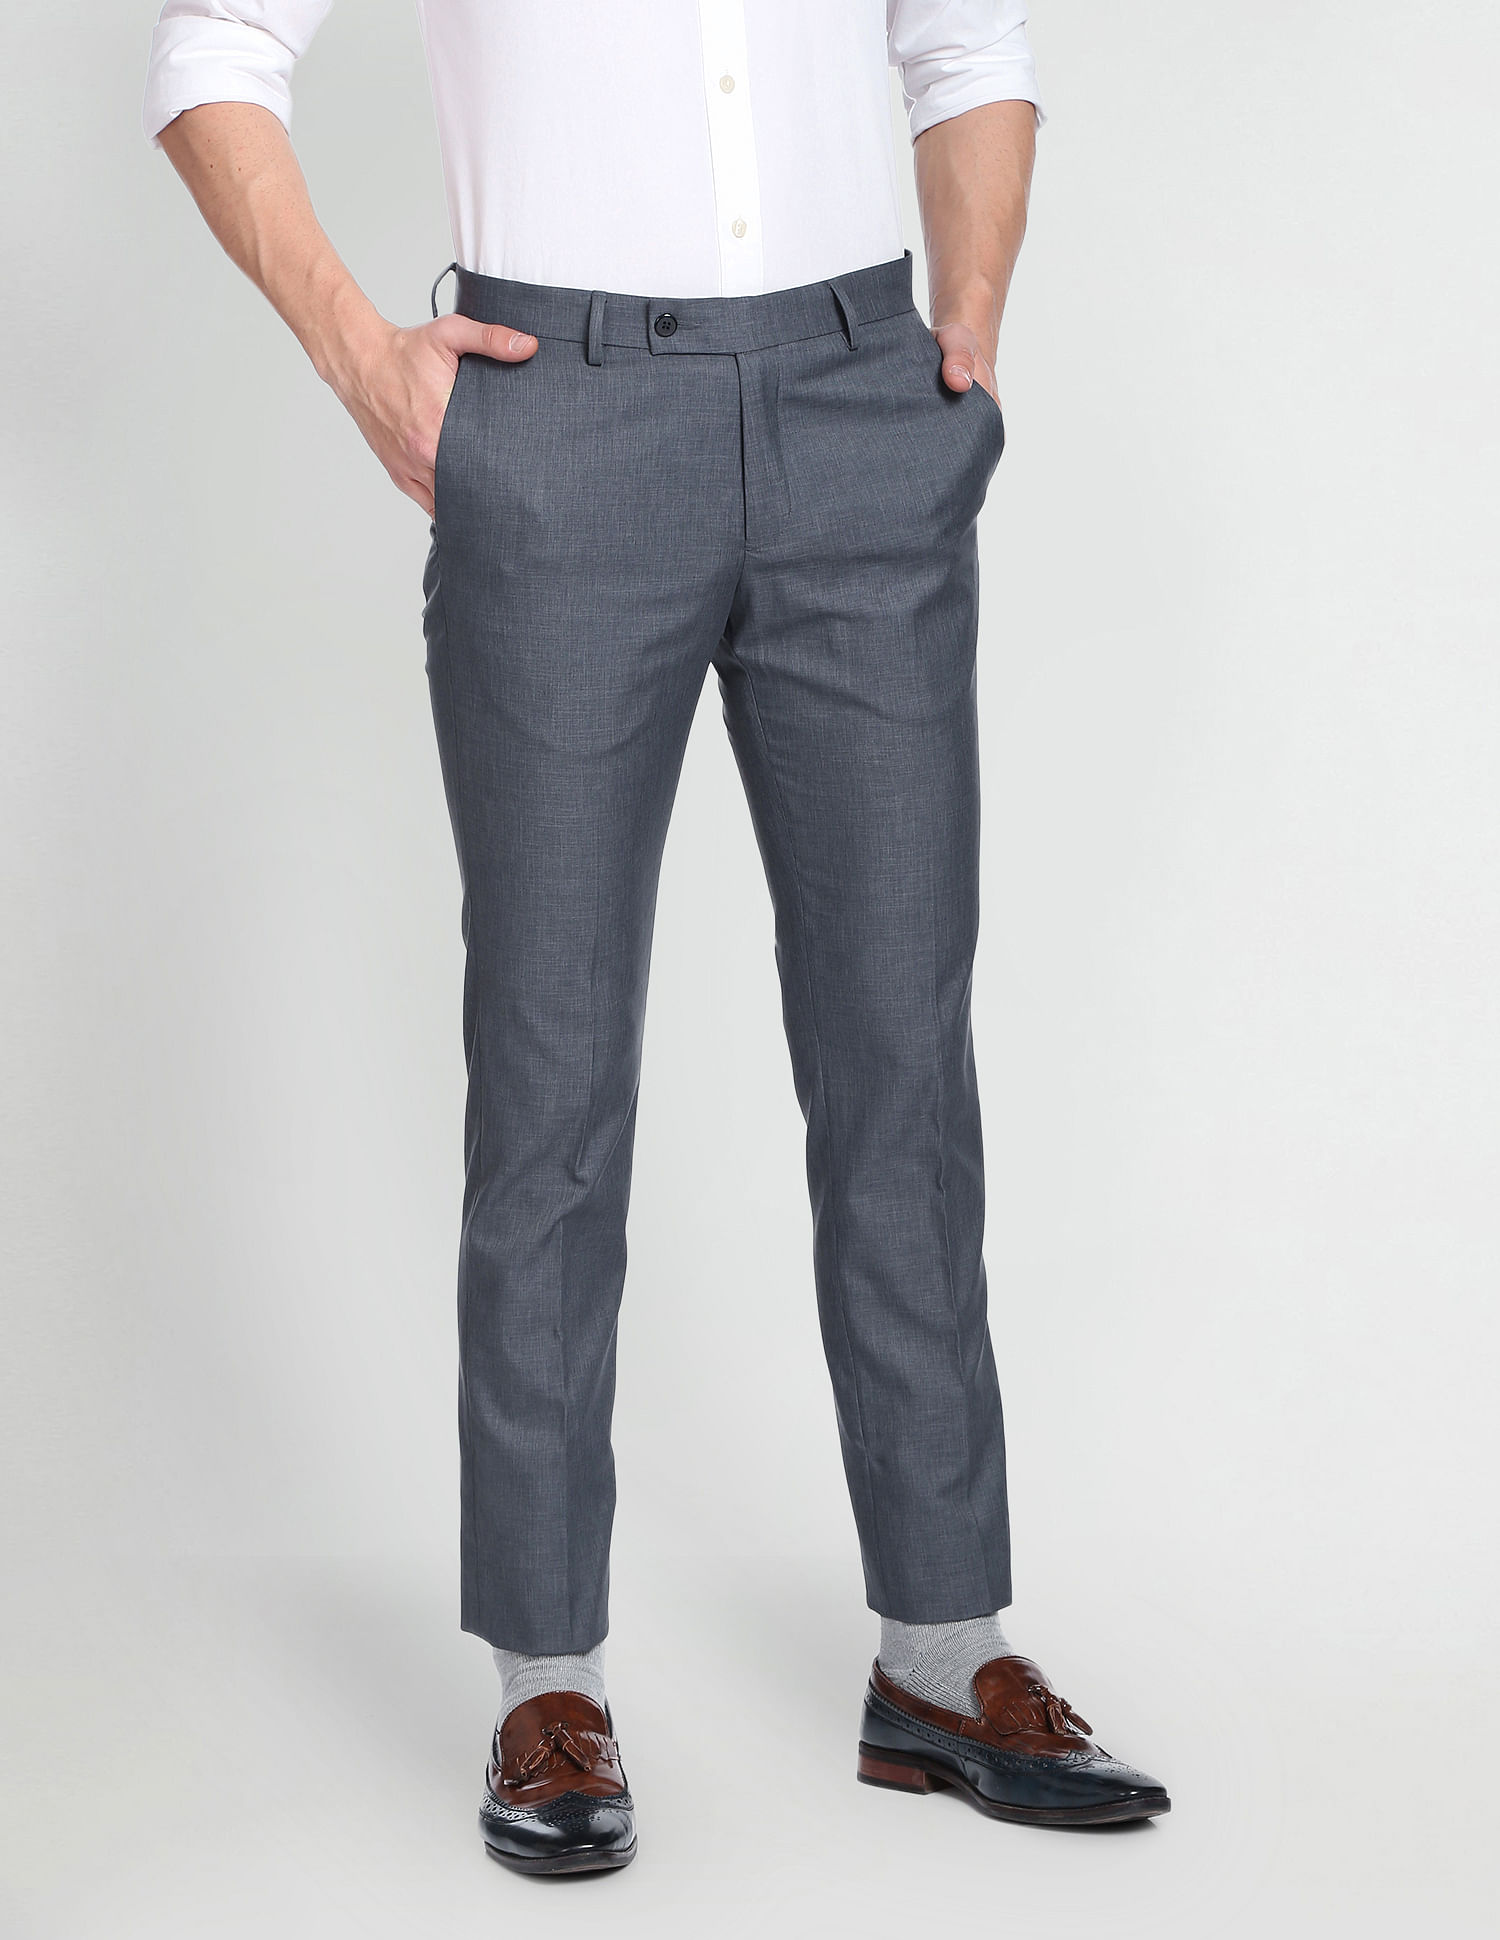 Buy Formal Pants and Trousers Online in India - ScholarShoppe